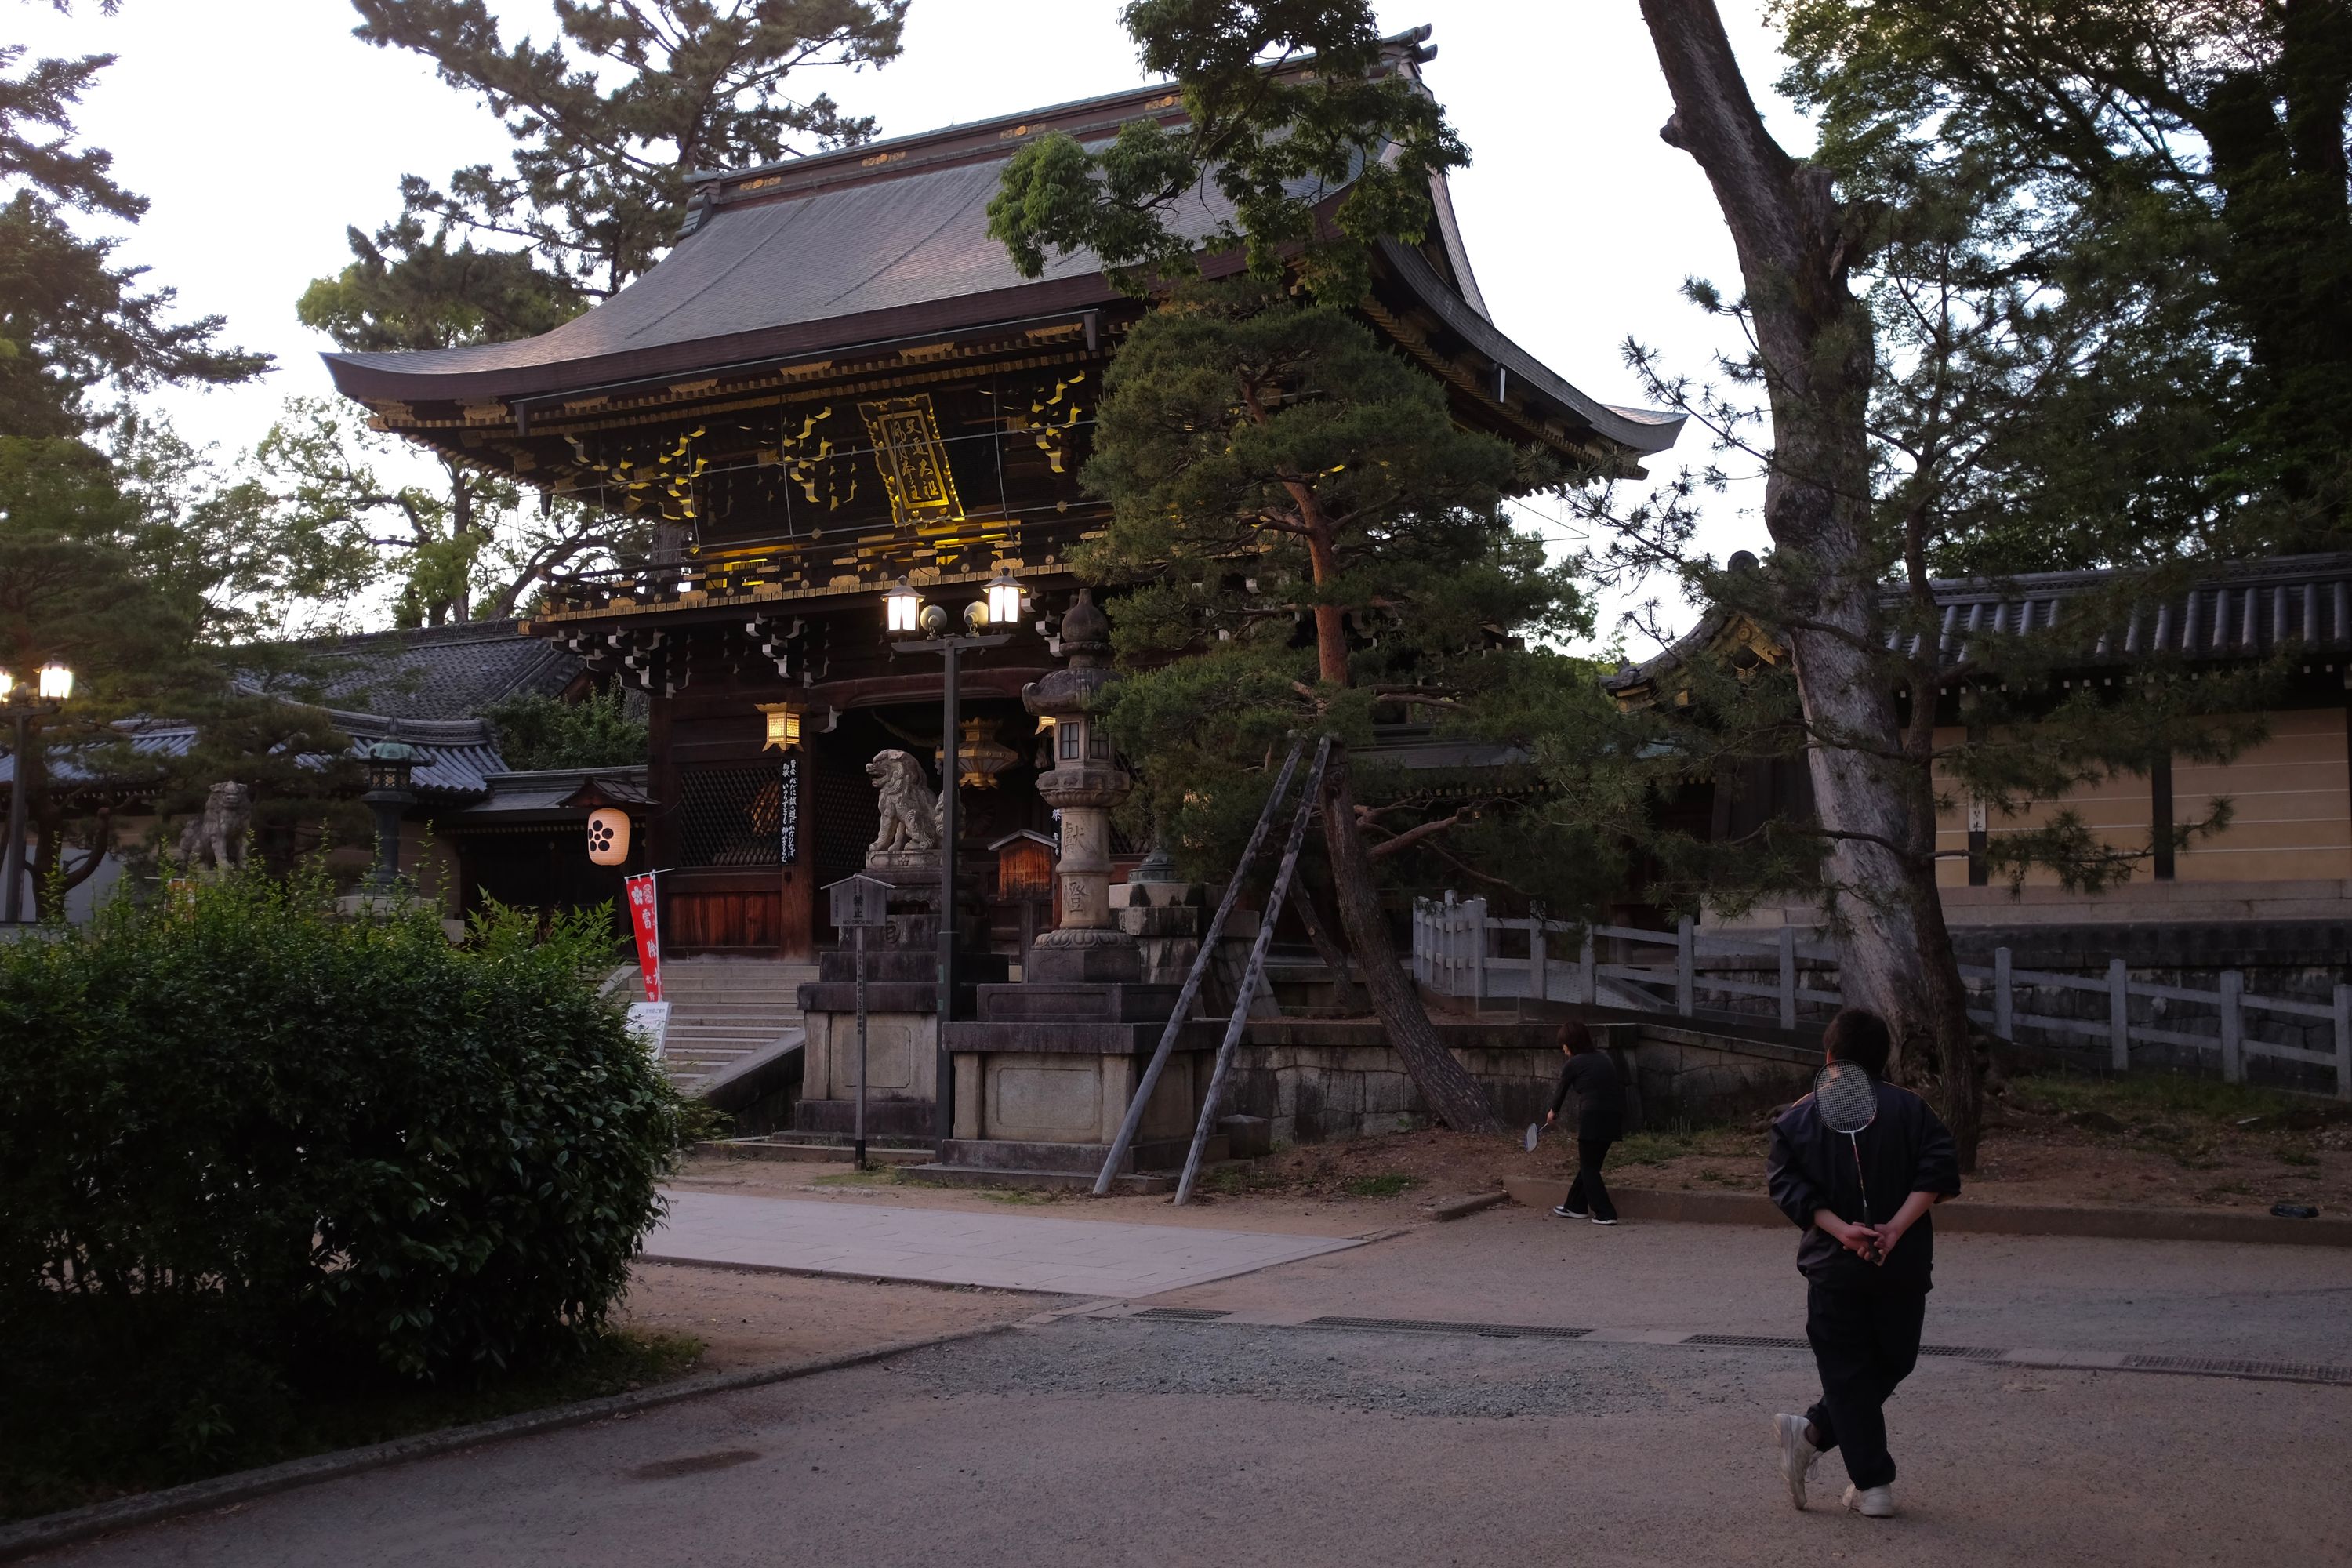 Two people play badminton in the garden of a Japanese shrine.